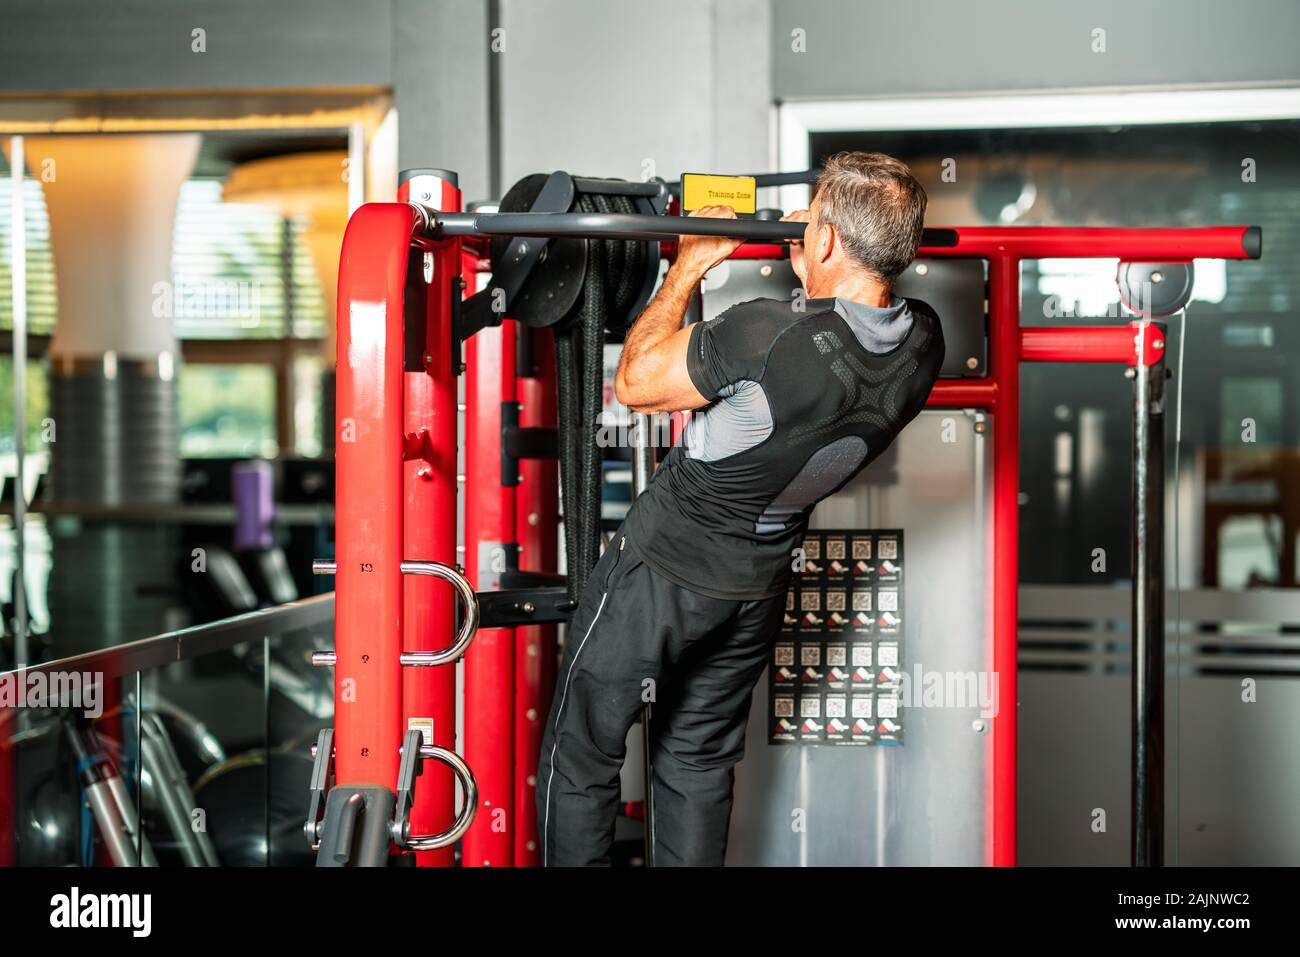 man strengthening his muscles by doing pull-up on horizontal bar in a fitness center. Stock Photo